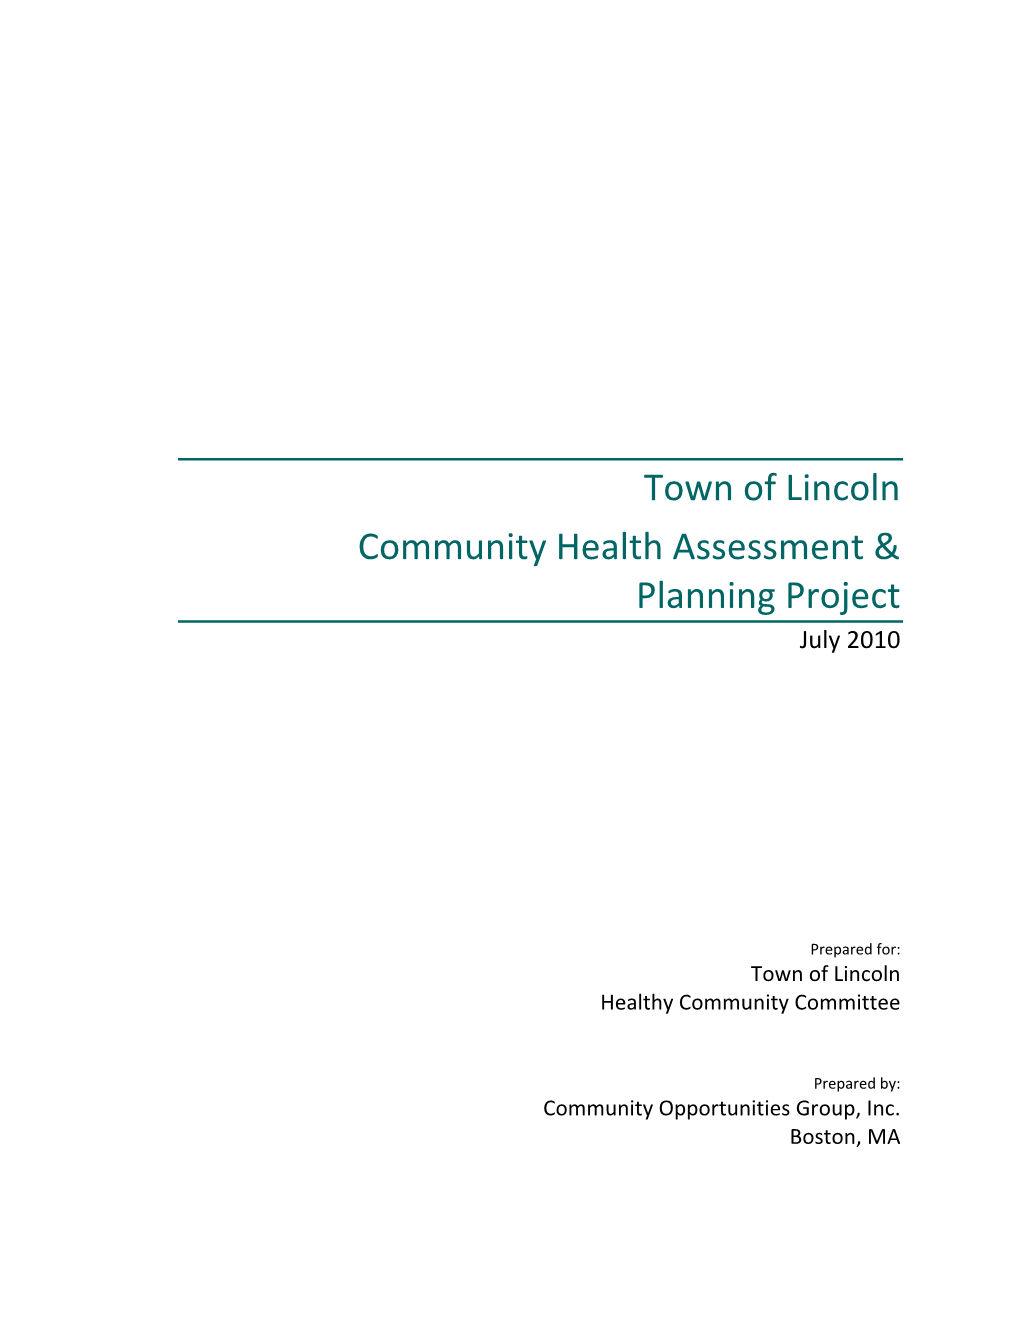 Town of Lincoln Community Health Assessment & Planning Project